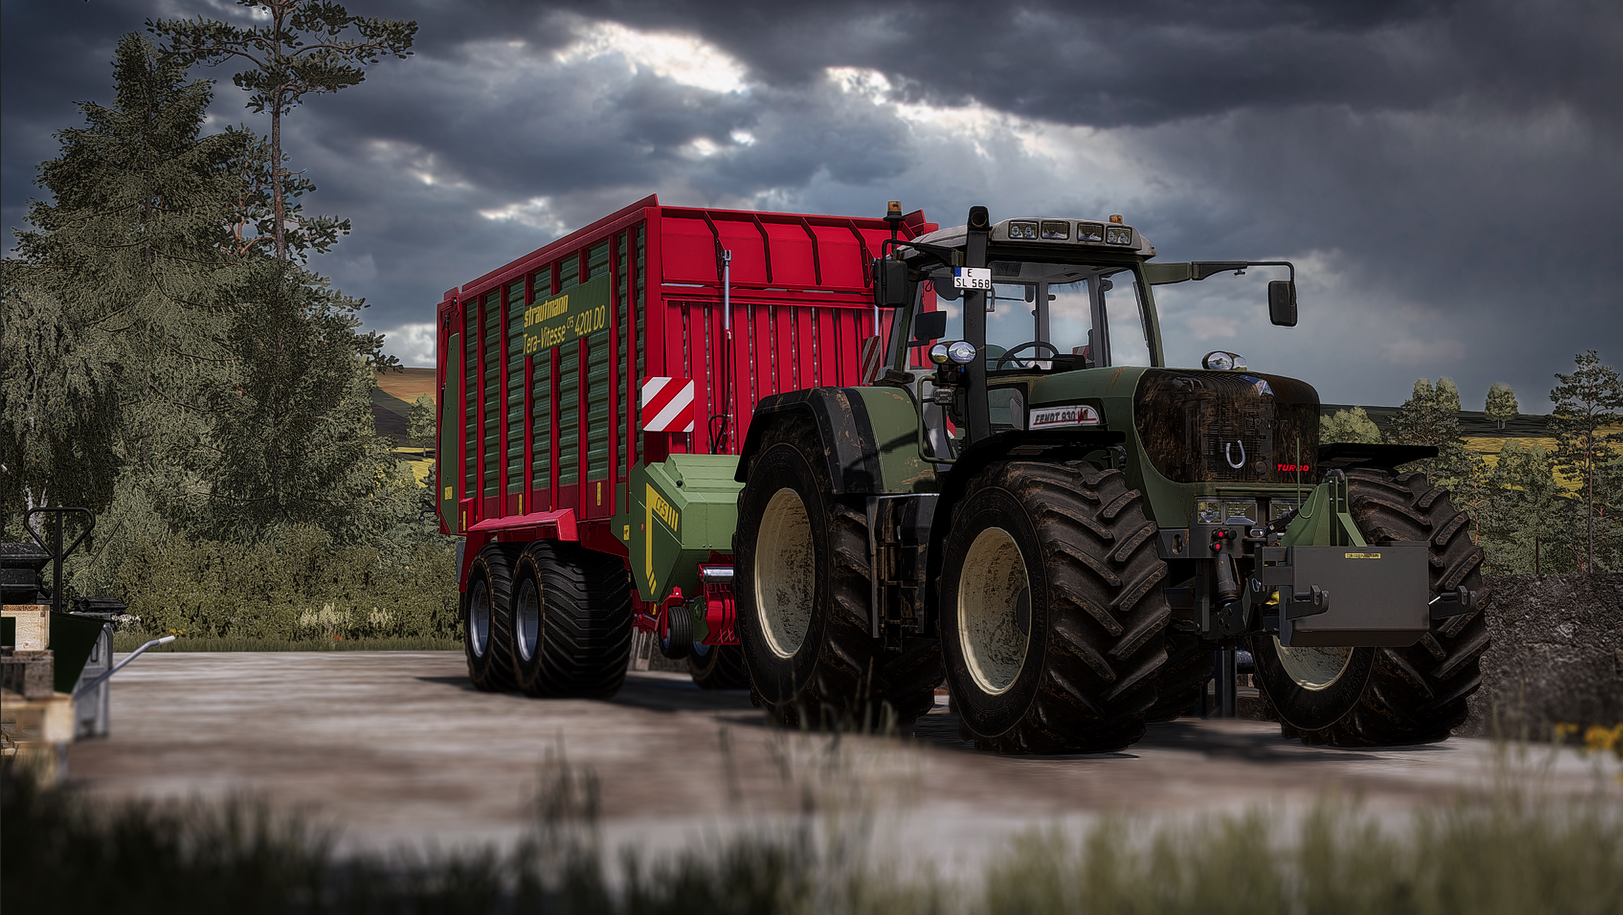 Fendt 900 TMS - Farming Duds Physikanpassung